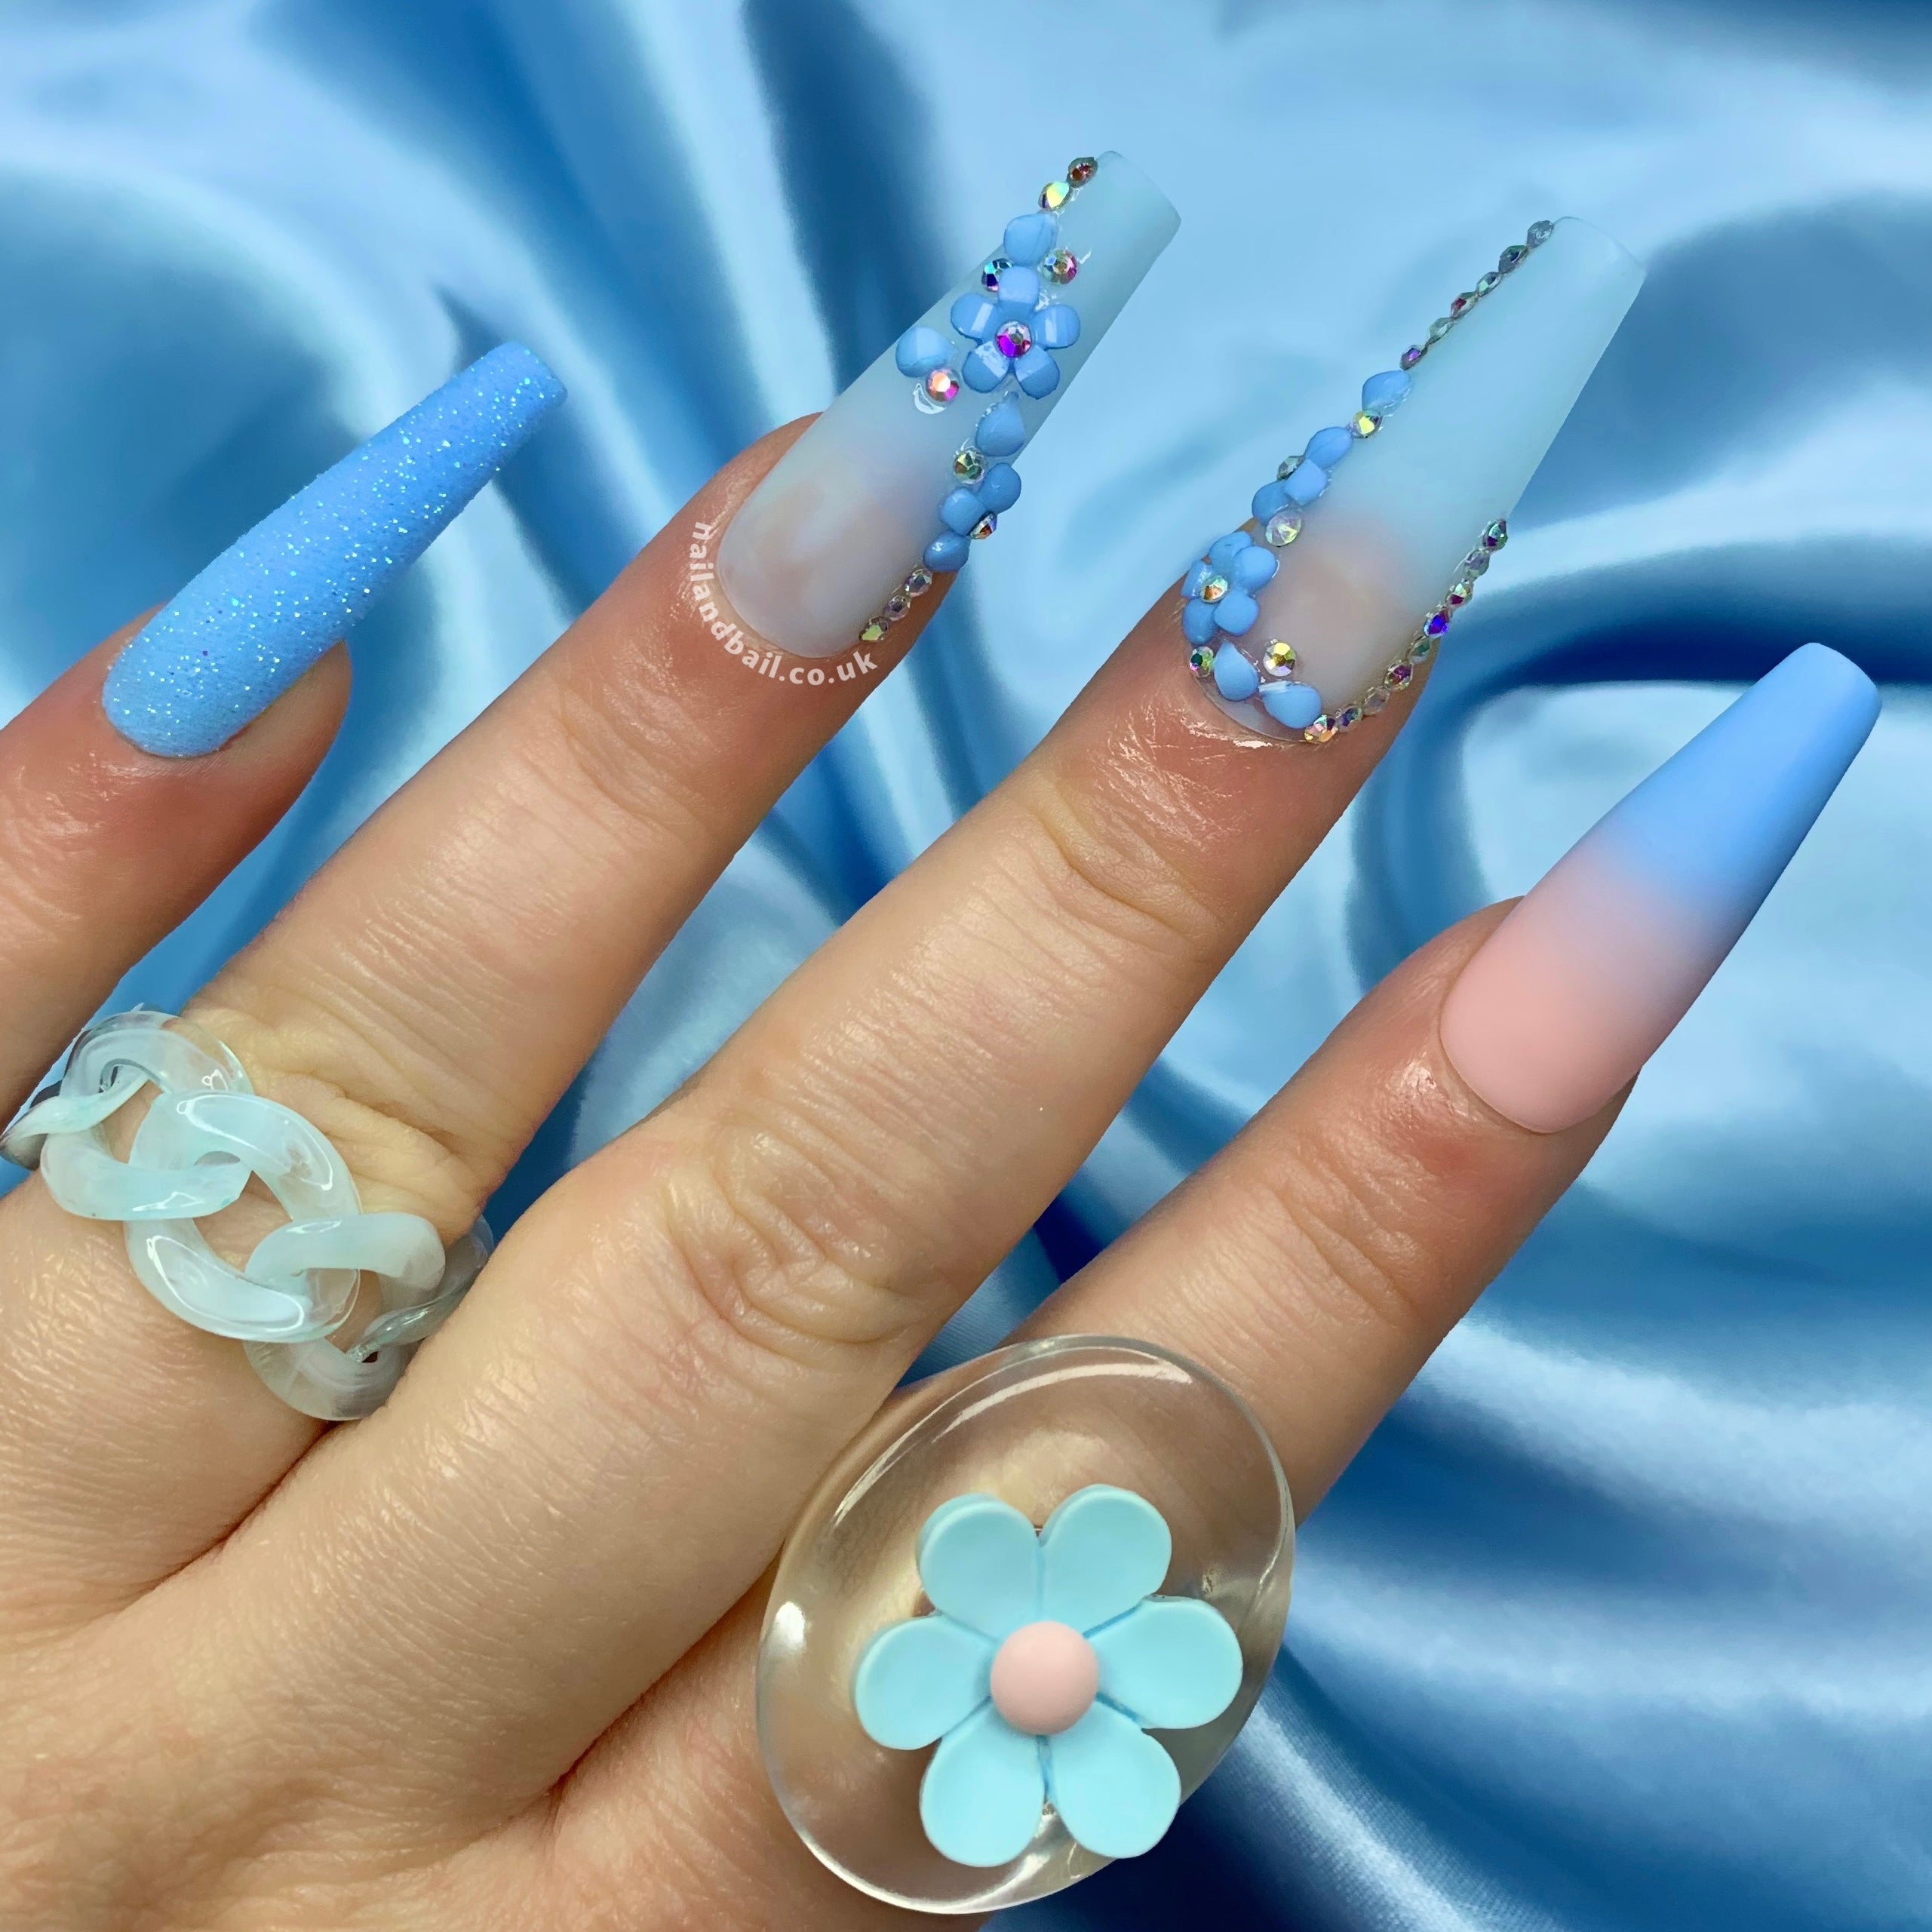 15 Blue Velvet Nail Ideas That Prove the Trend Is Here to Stay